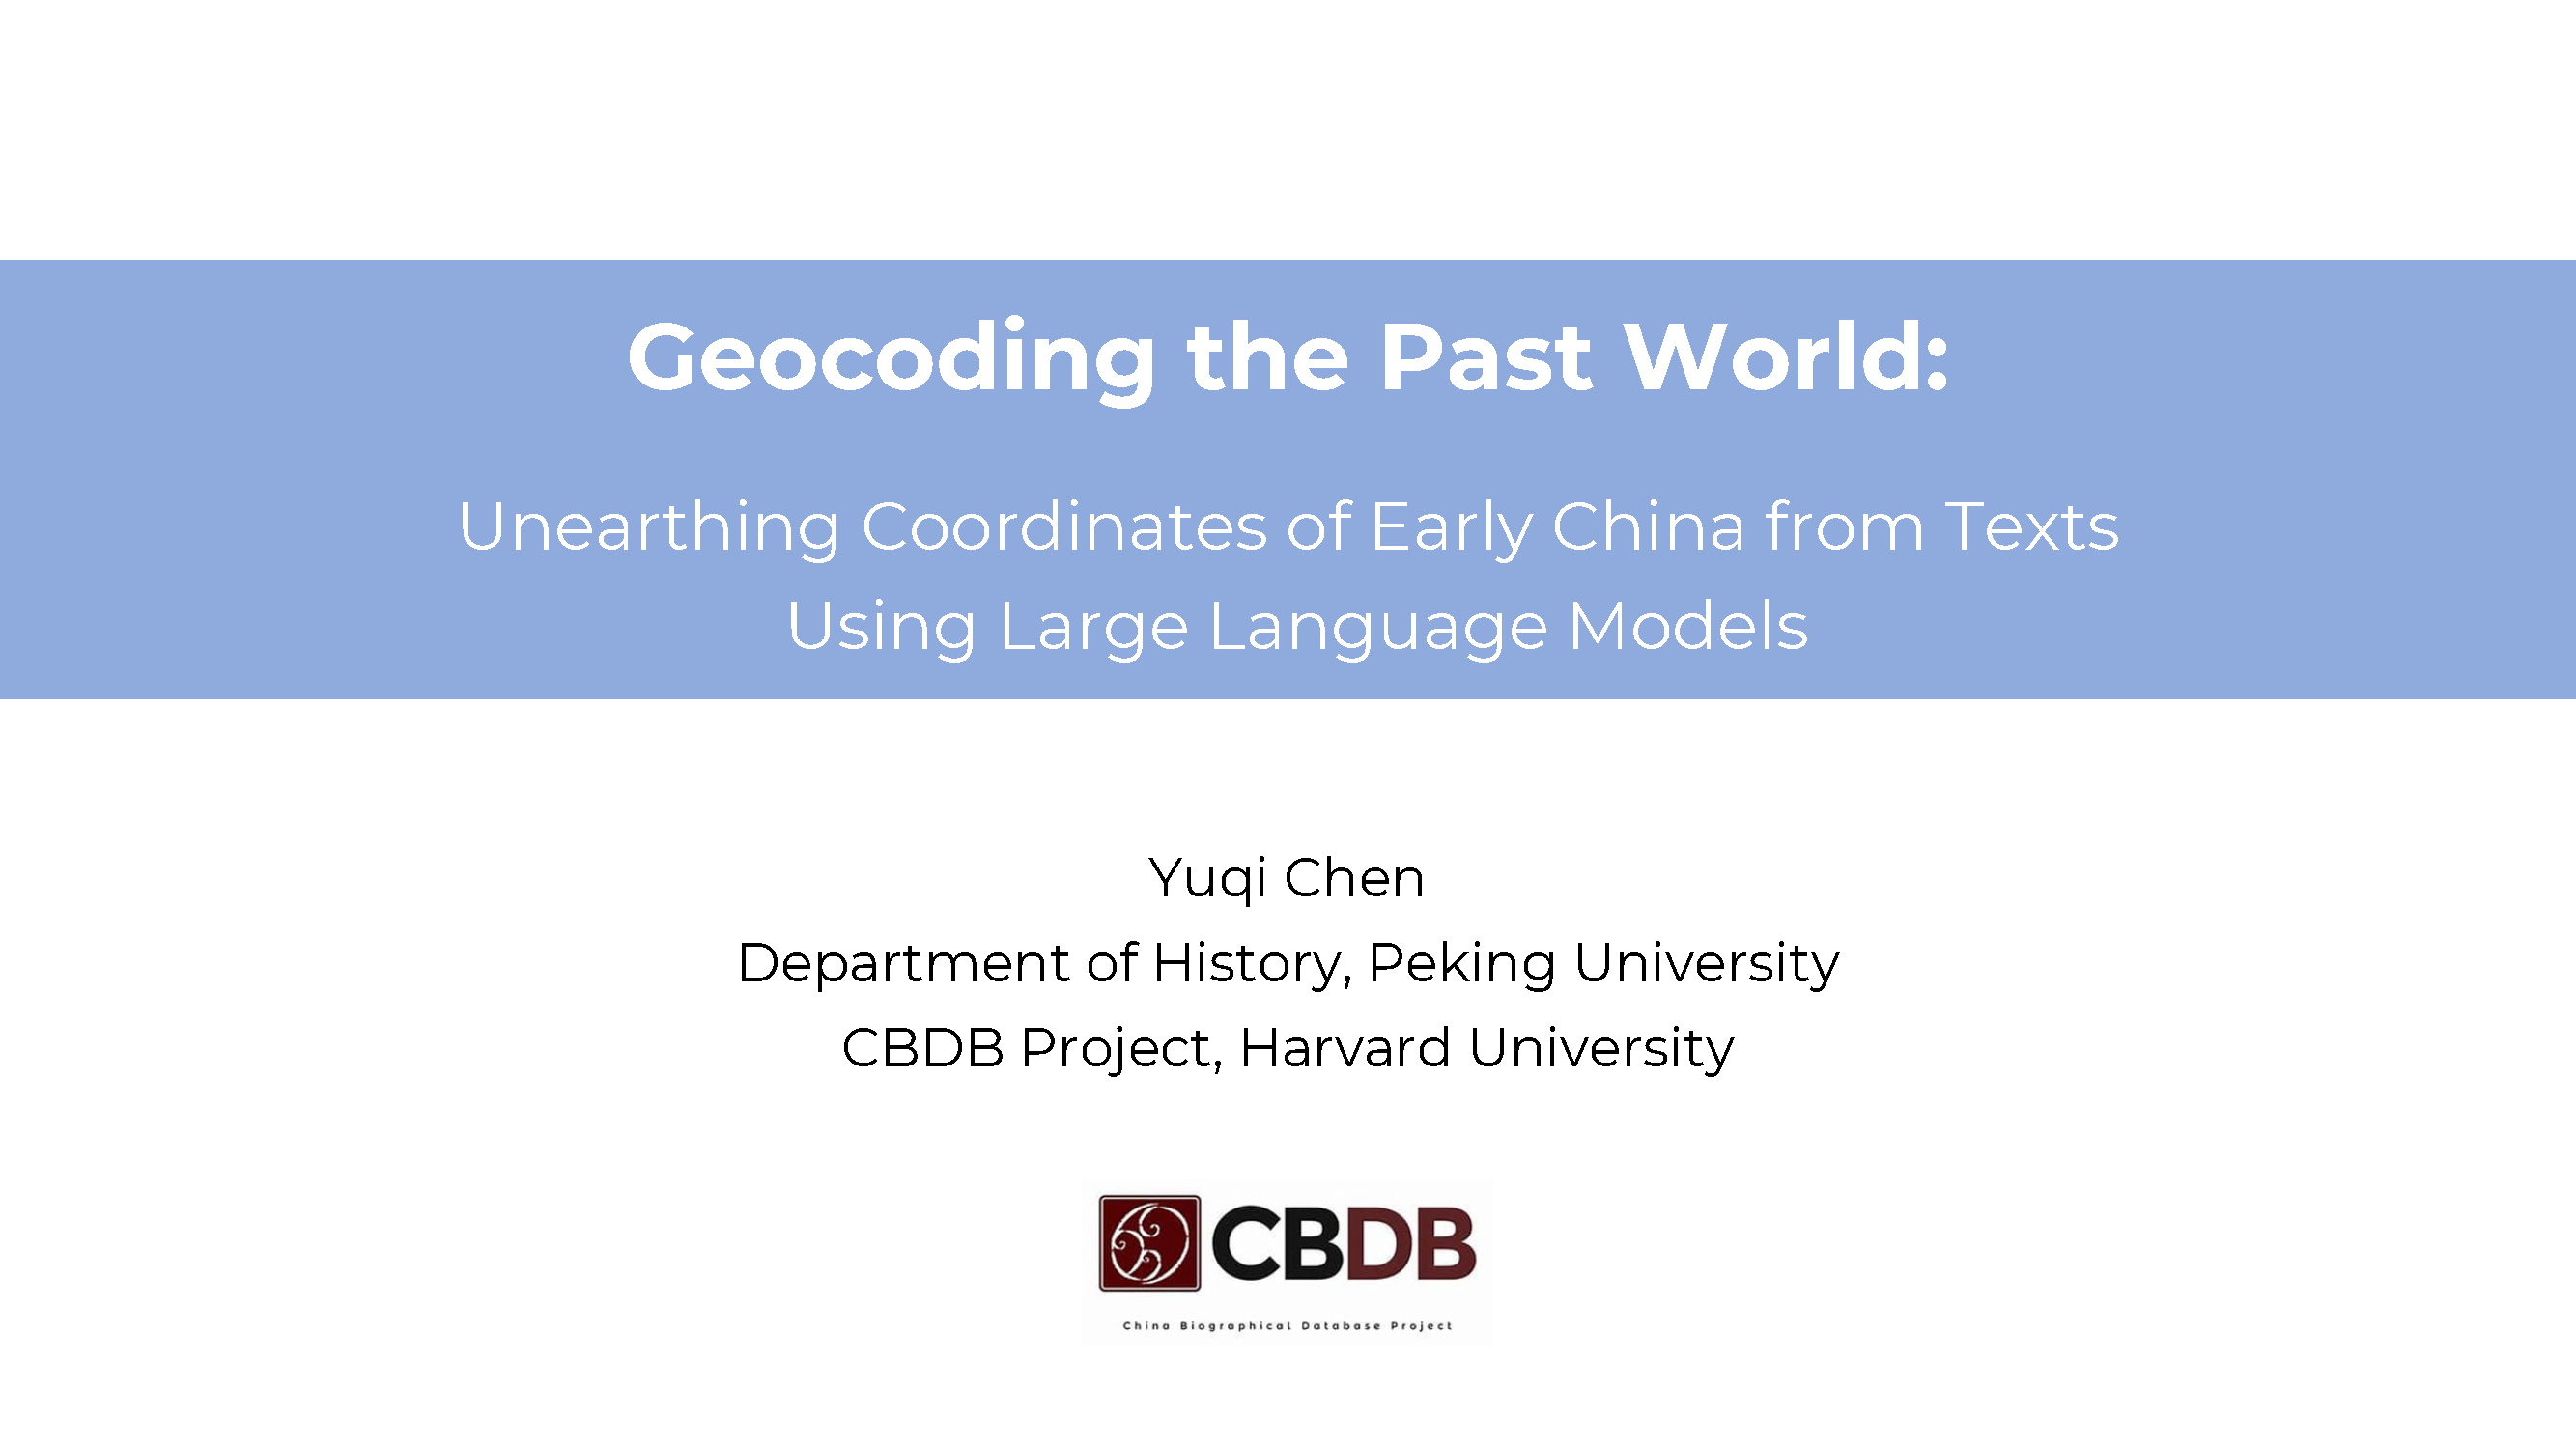 Geocoding the Past World: Unearthing Coordinates of Early China from Texts Using Generative AI